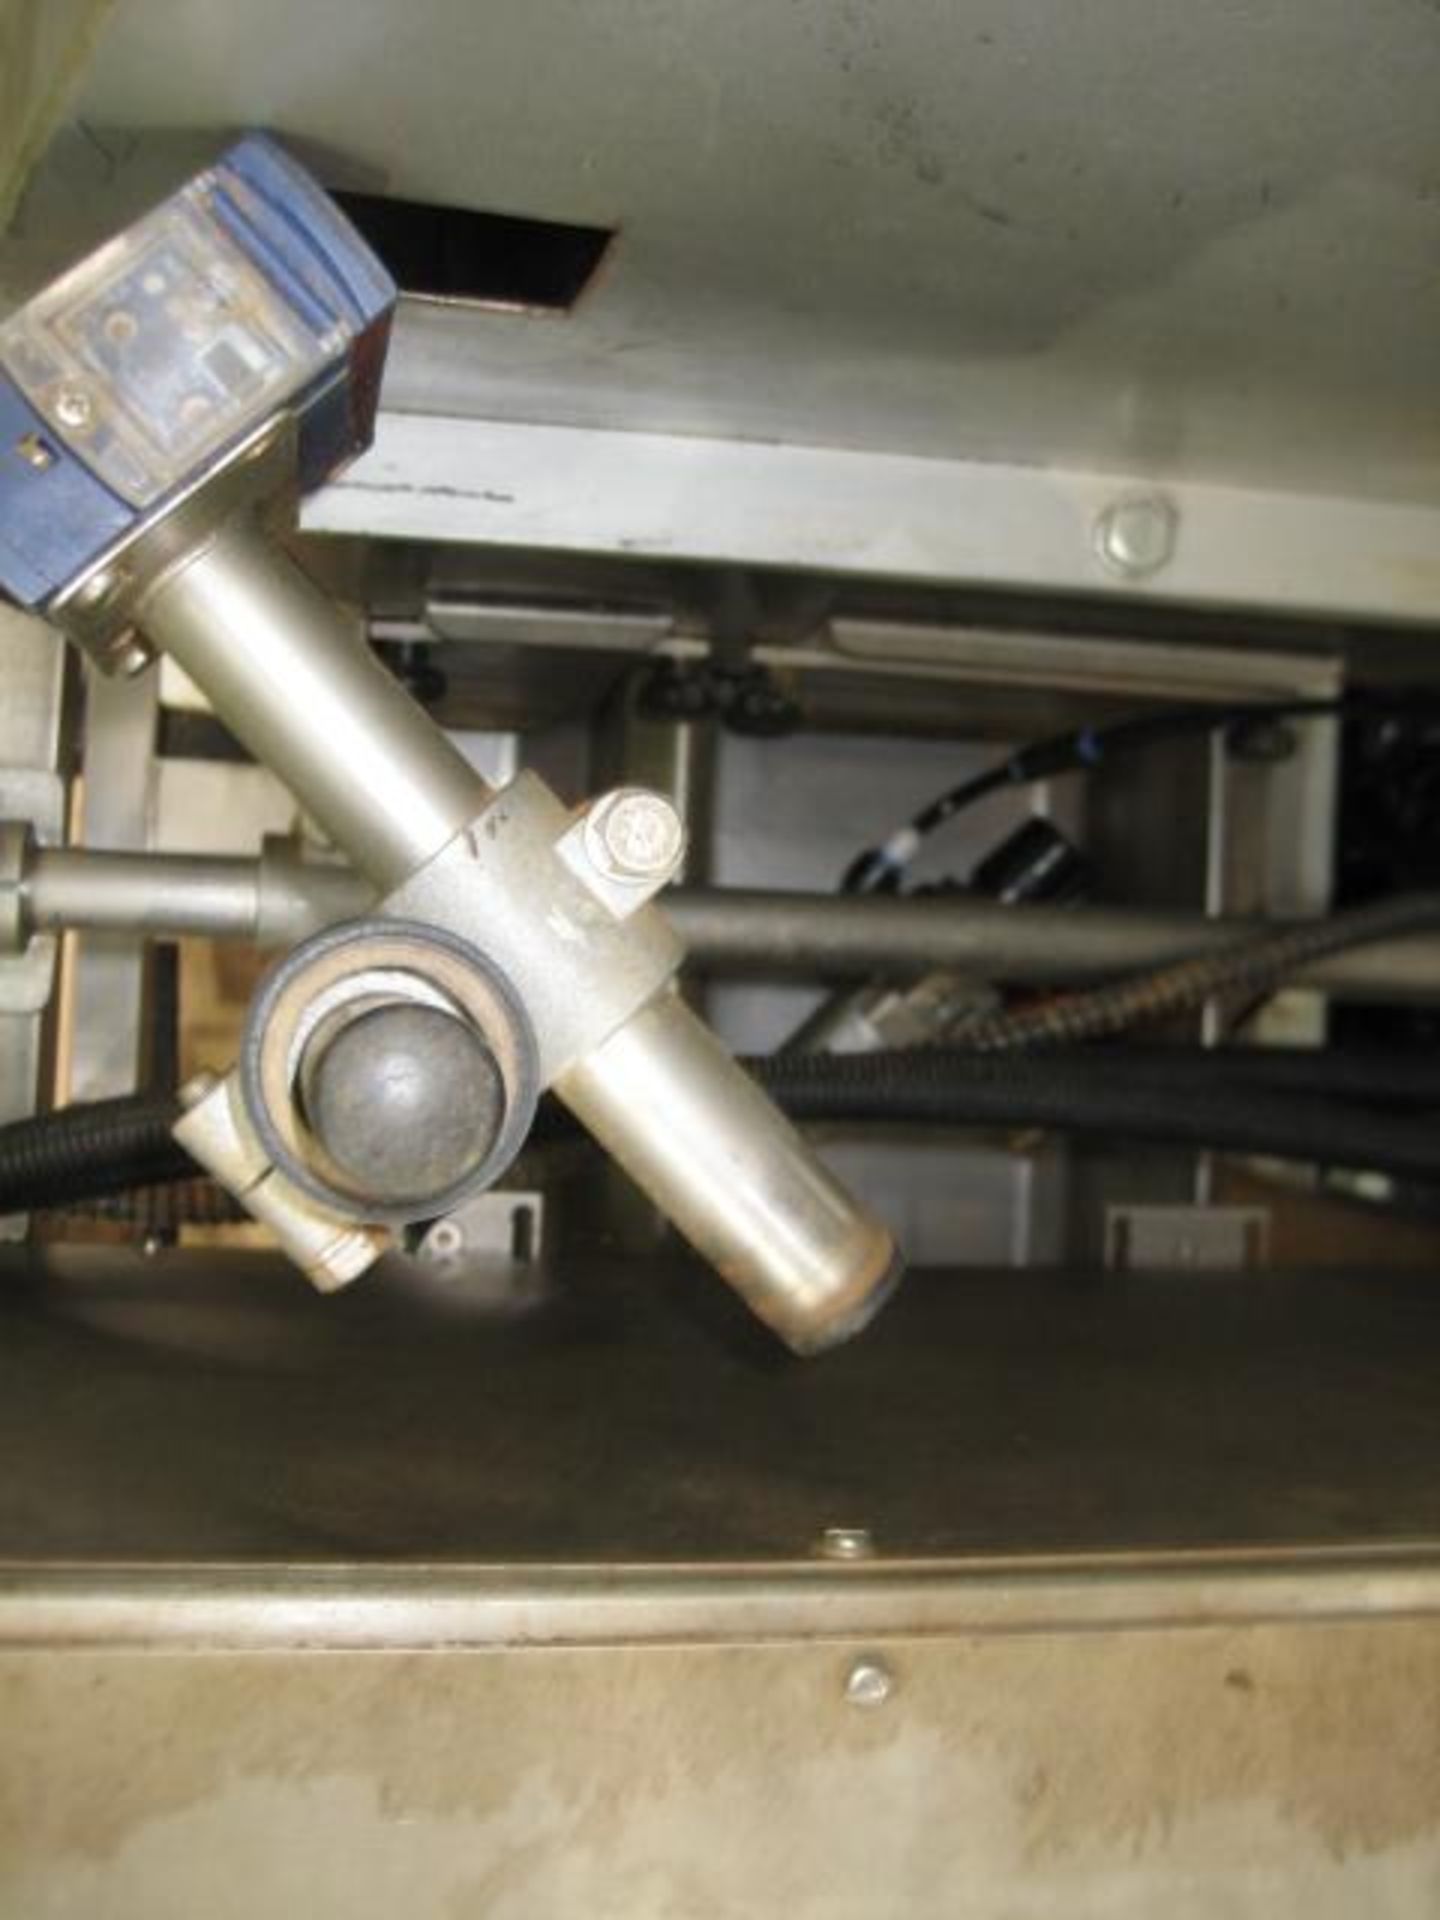 Weigher - Ward Bekker Digiway single channel linear weigher in stainless steel with control box. - Image 9 of 10